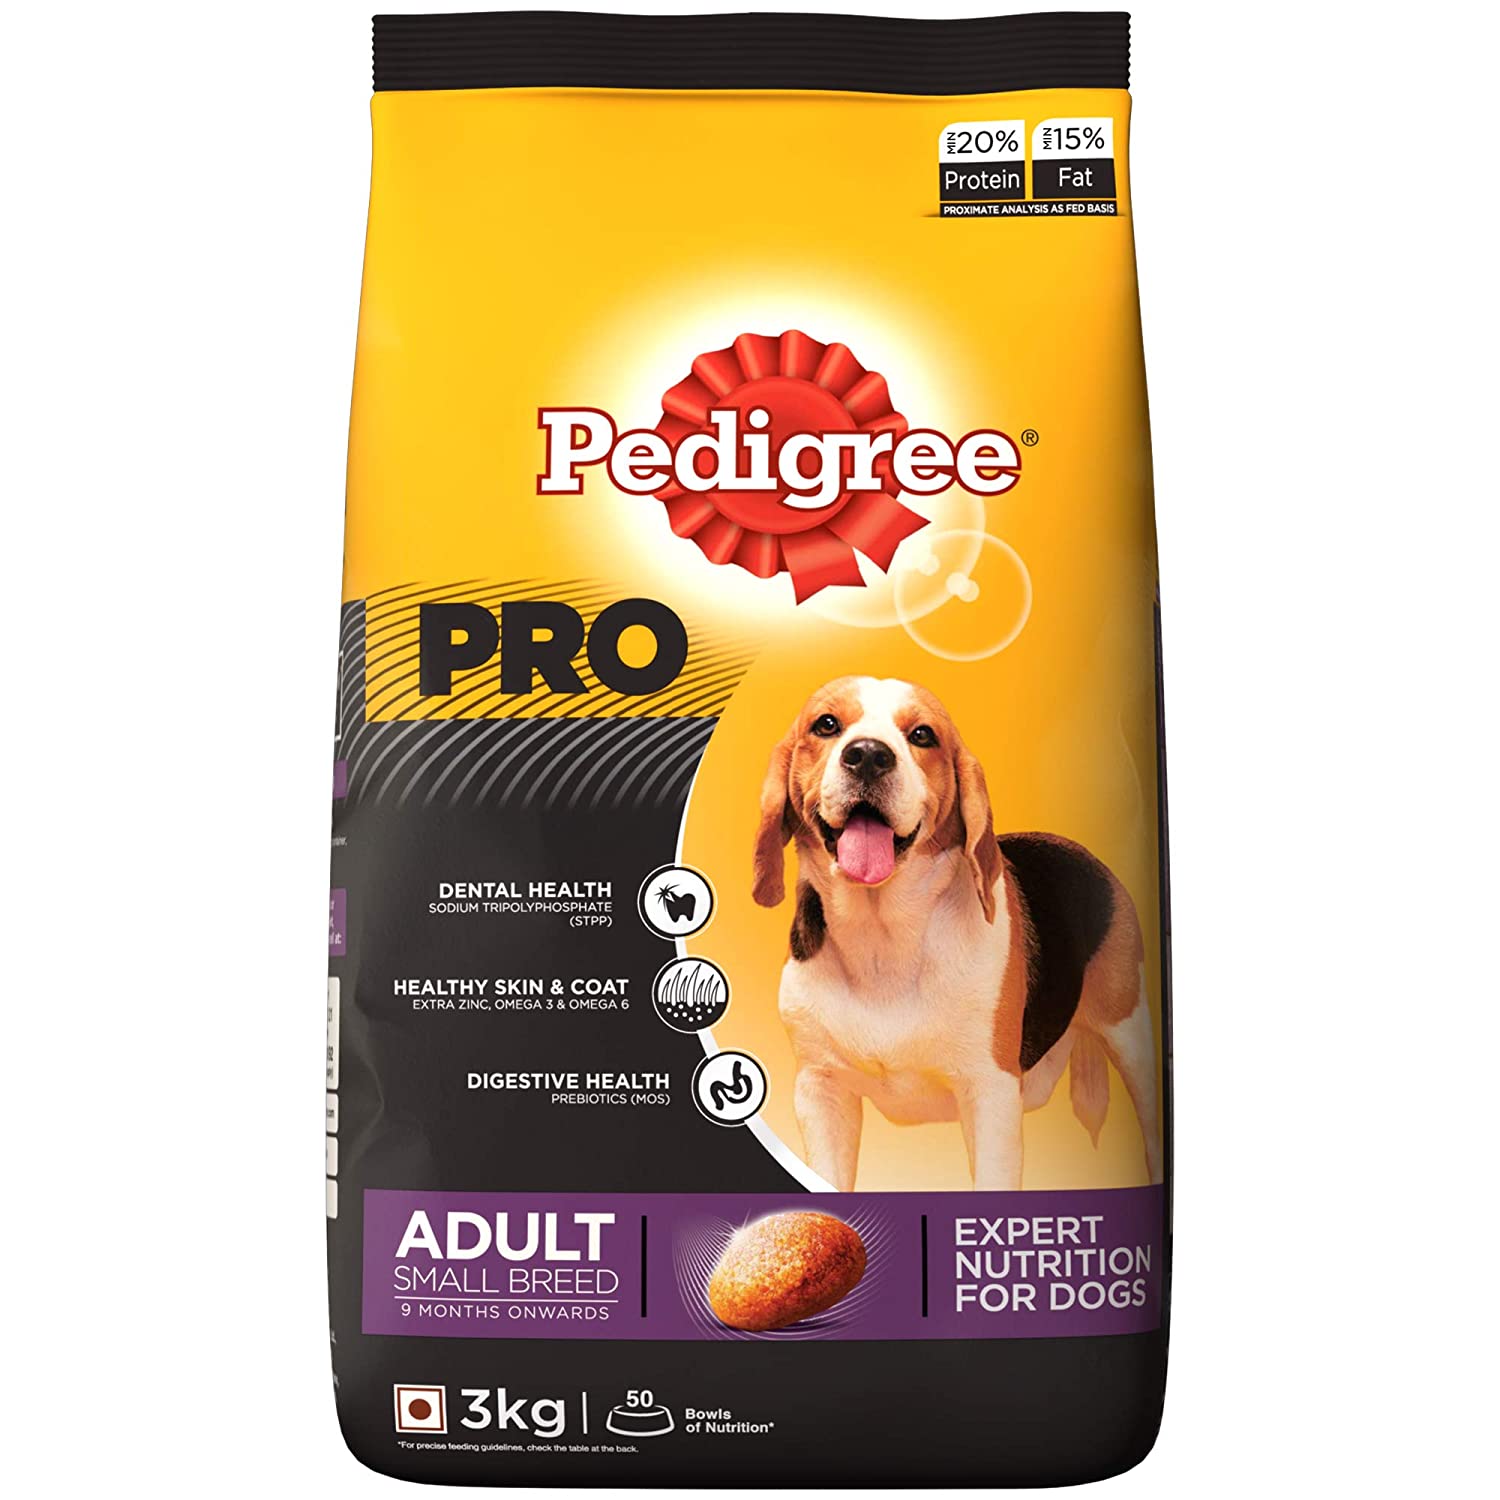 Pedigree PRO Expert Nutrition, Adult Small Breed Dogs 